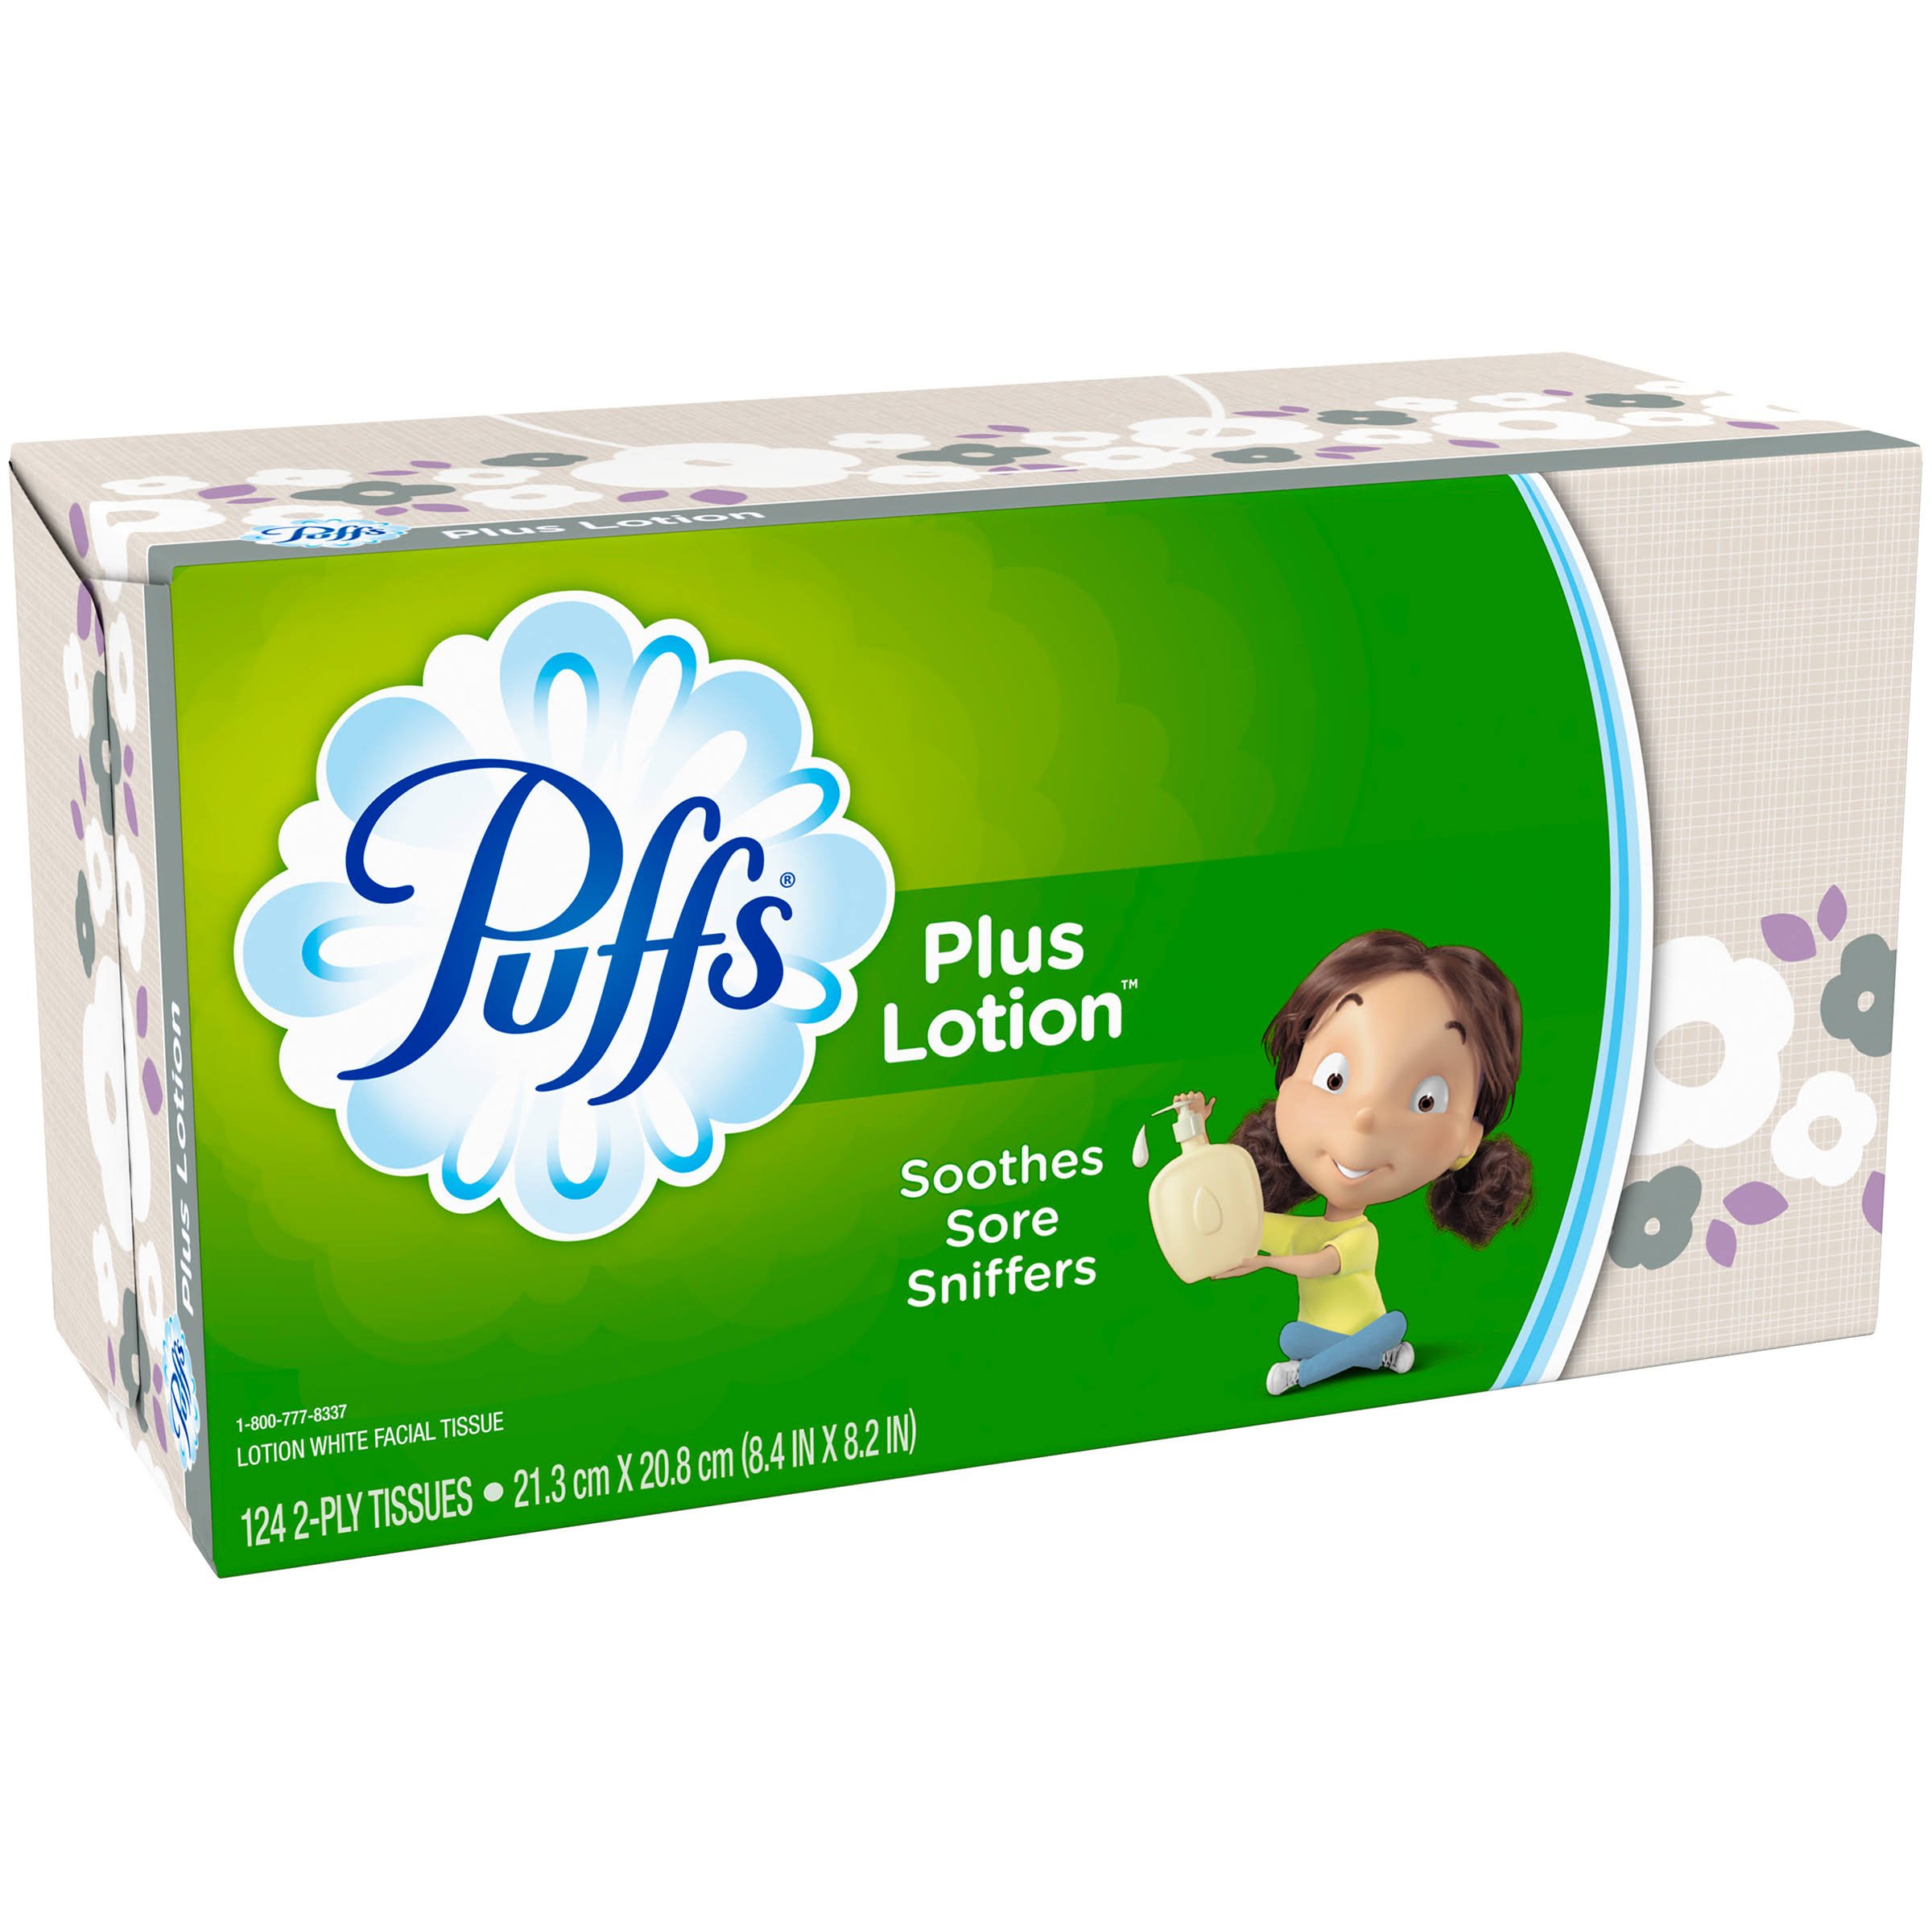 Puffs Plus Lotion Facial Tissues - 120 Count